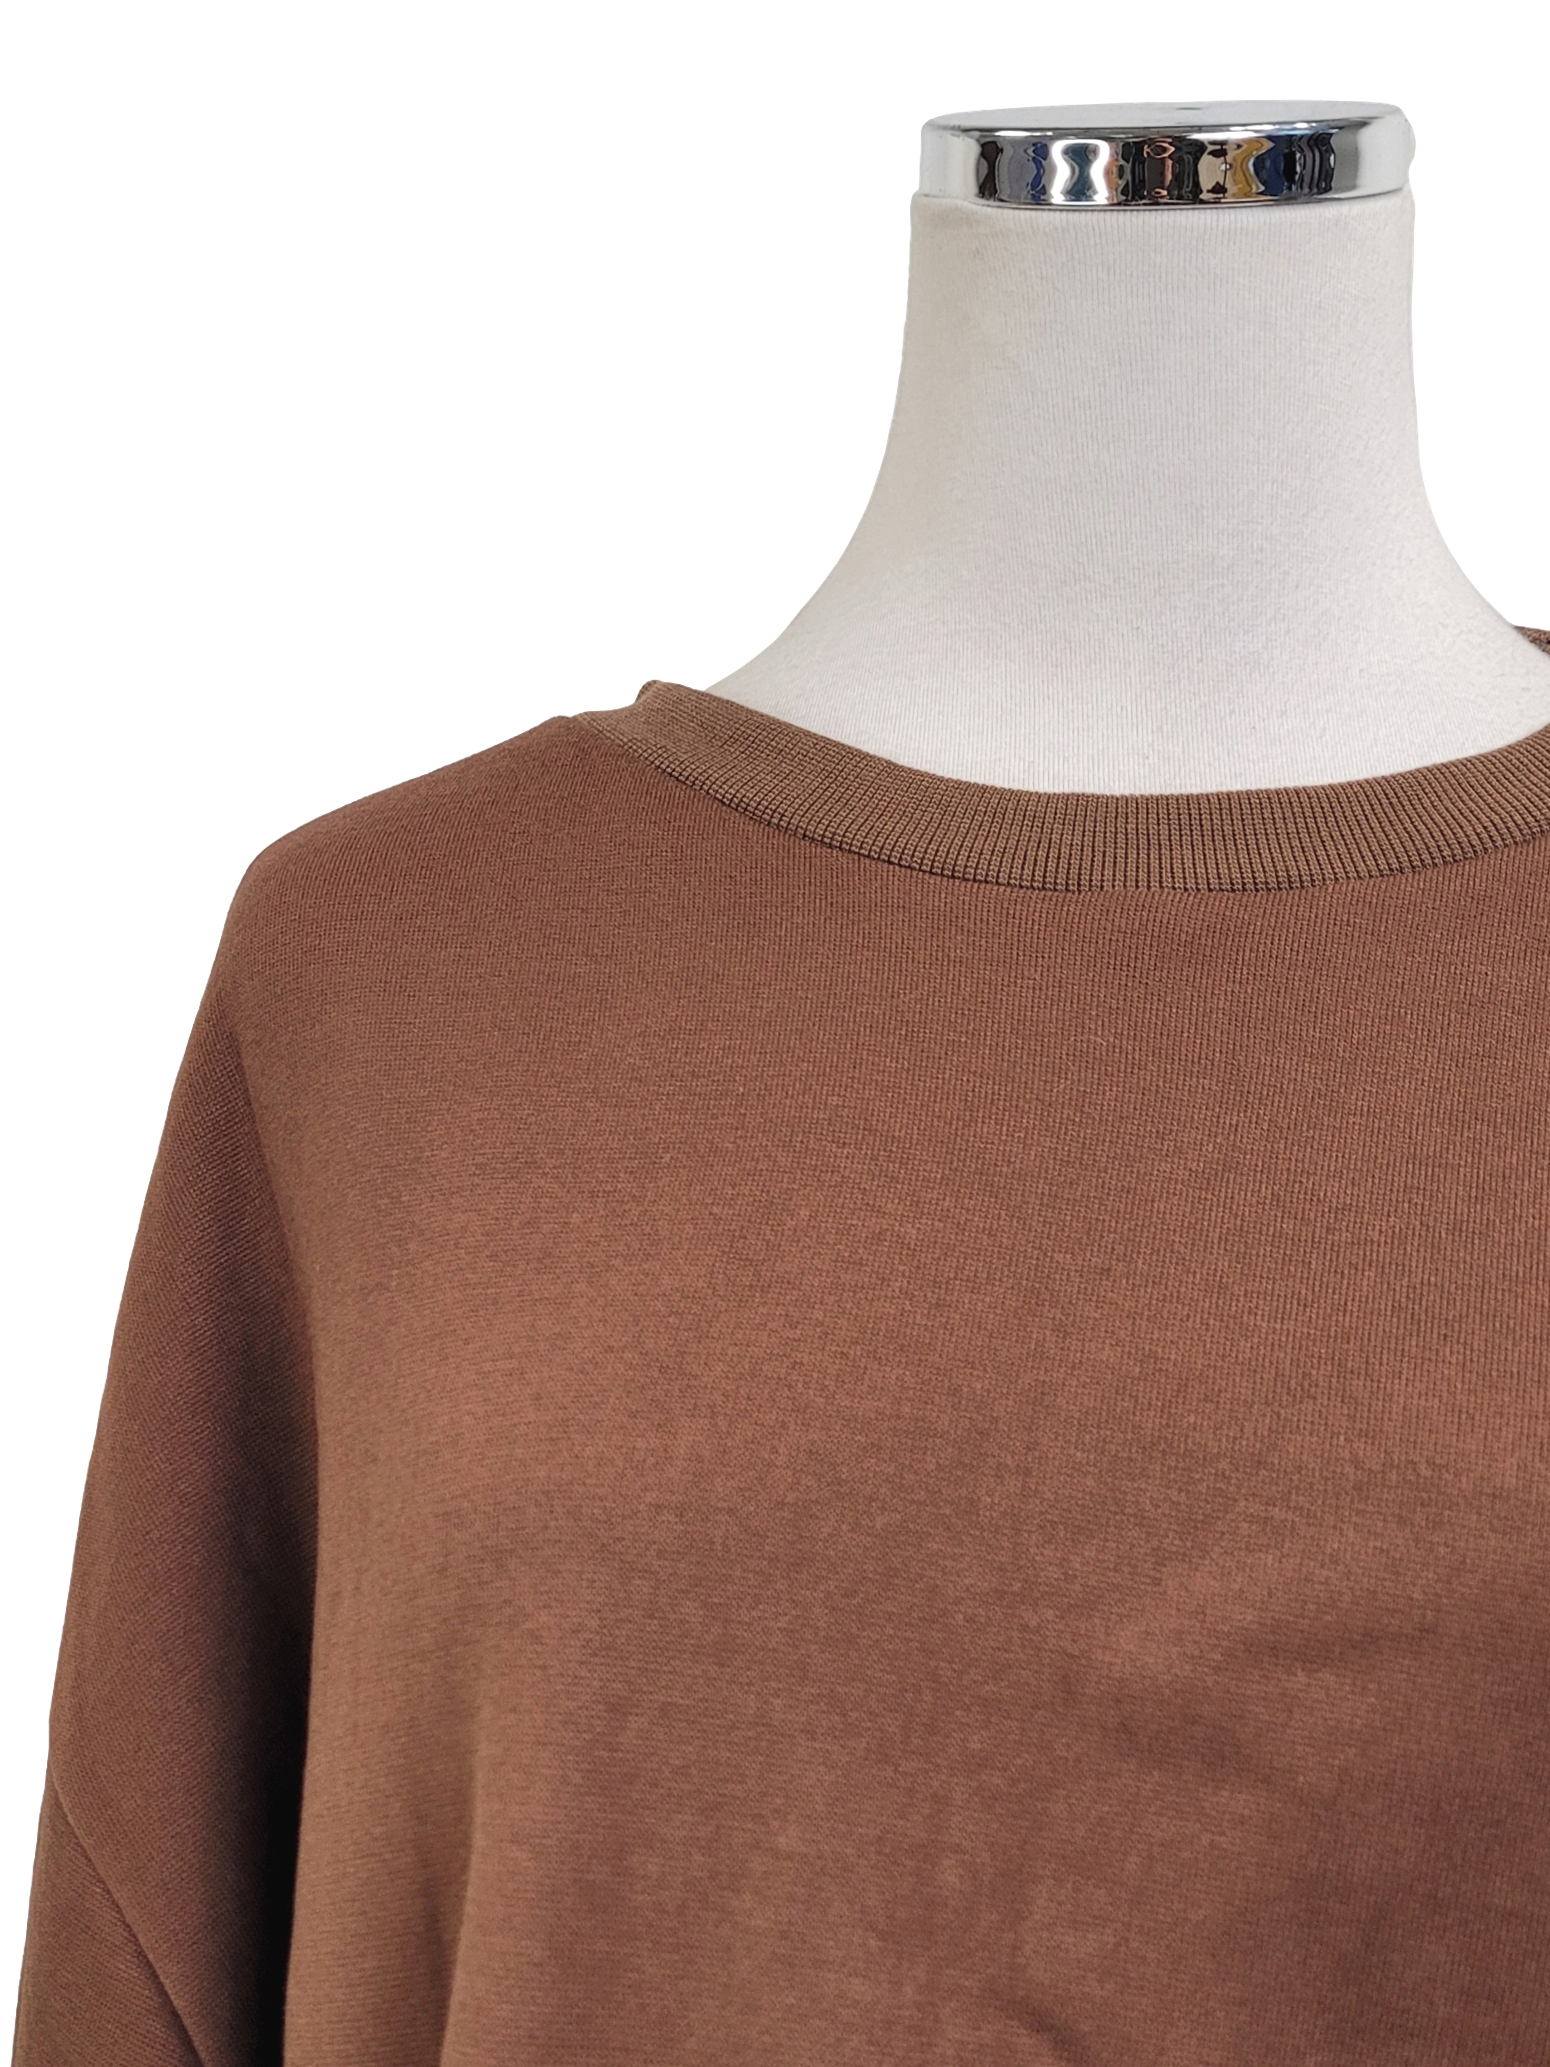 Spice Brown Sweater